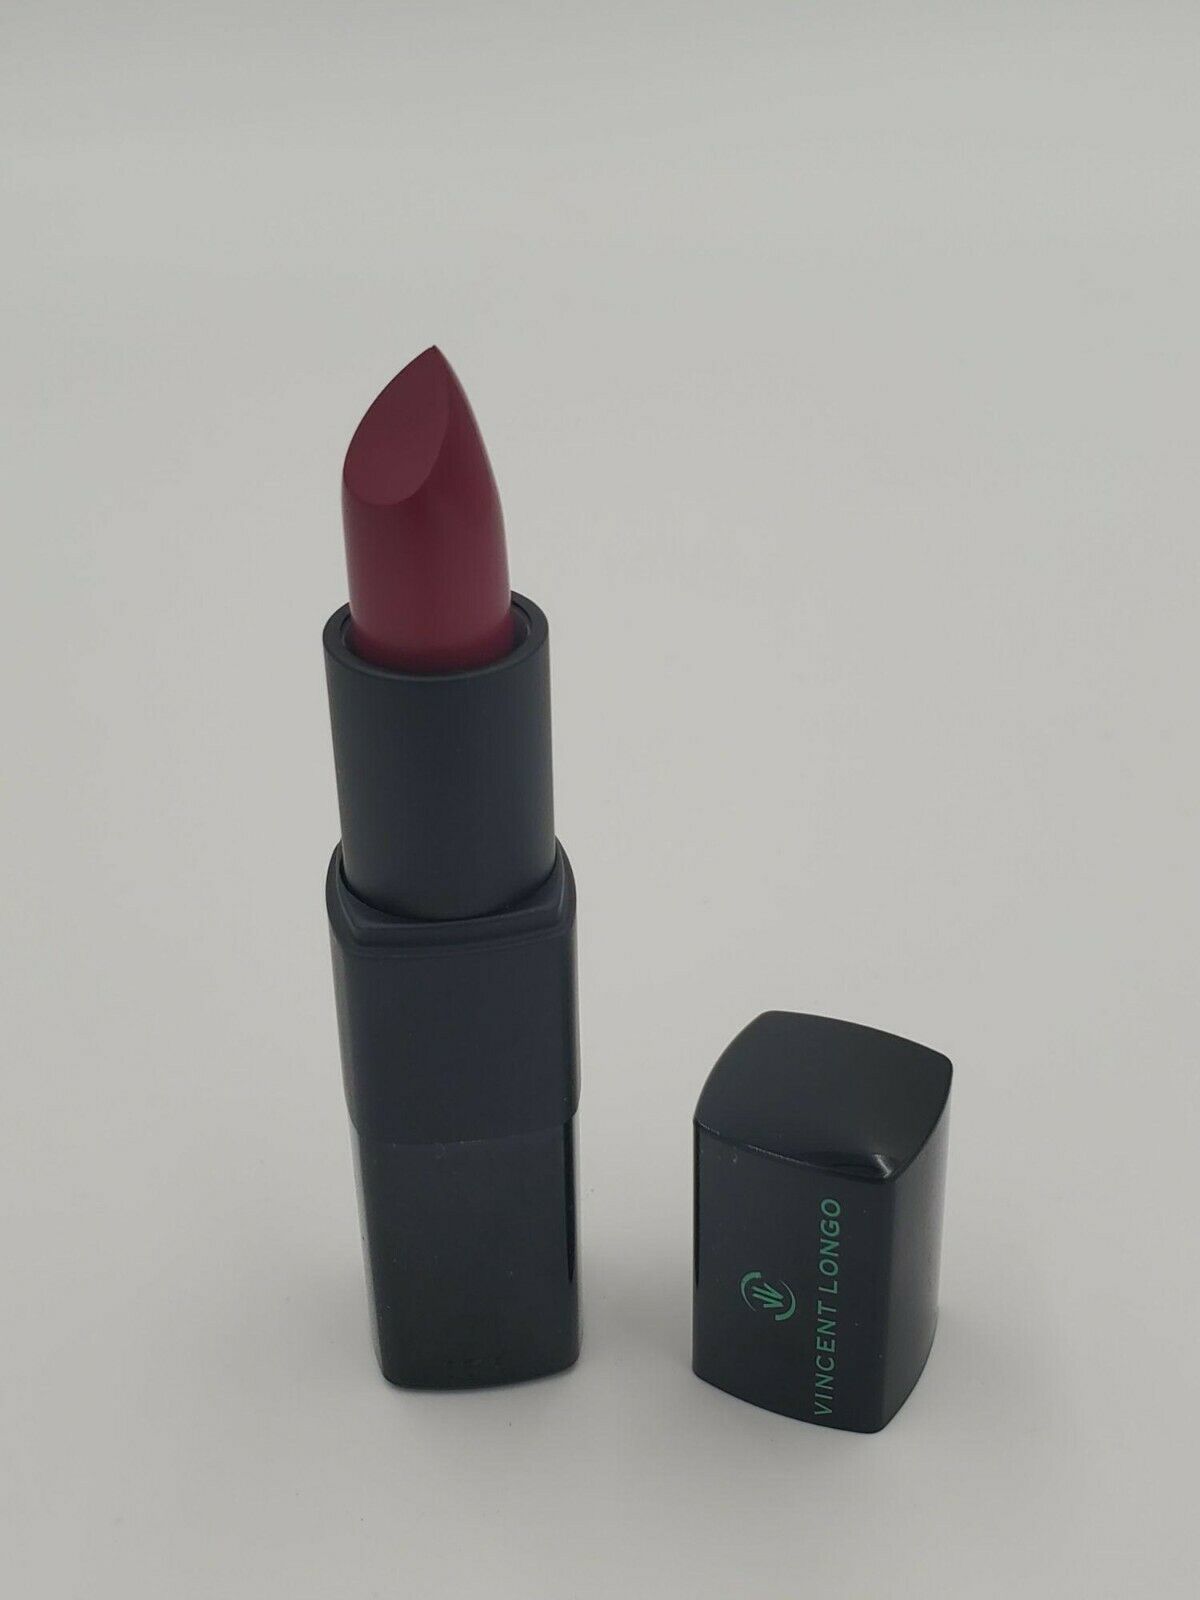 Primary image for Vincent Longo Lipstick 50771 Mulberry Silk Velour 0.12 Oz